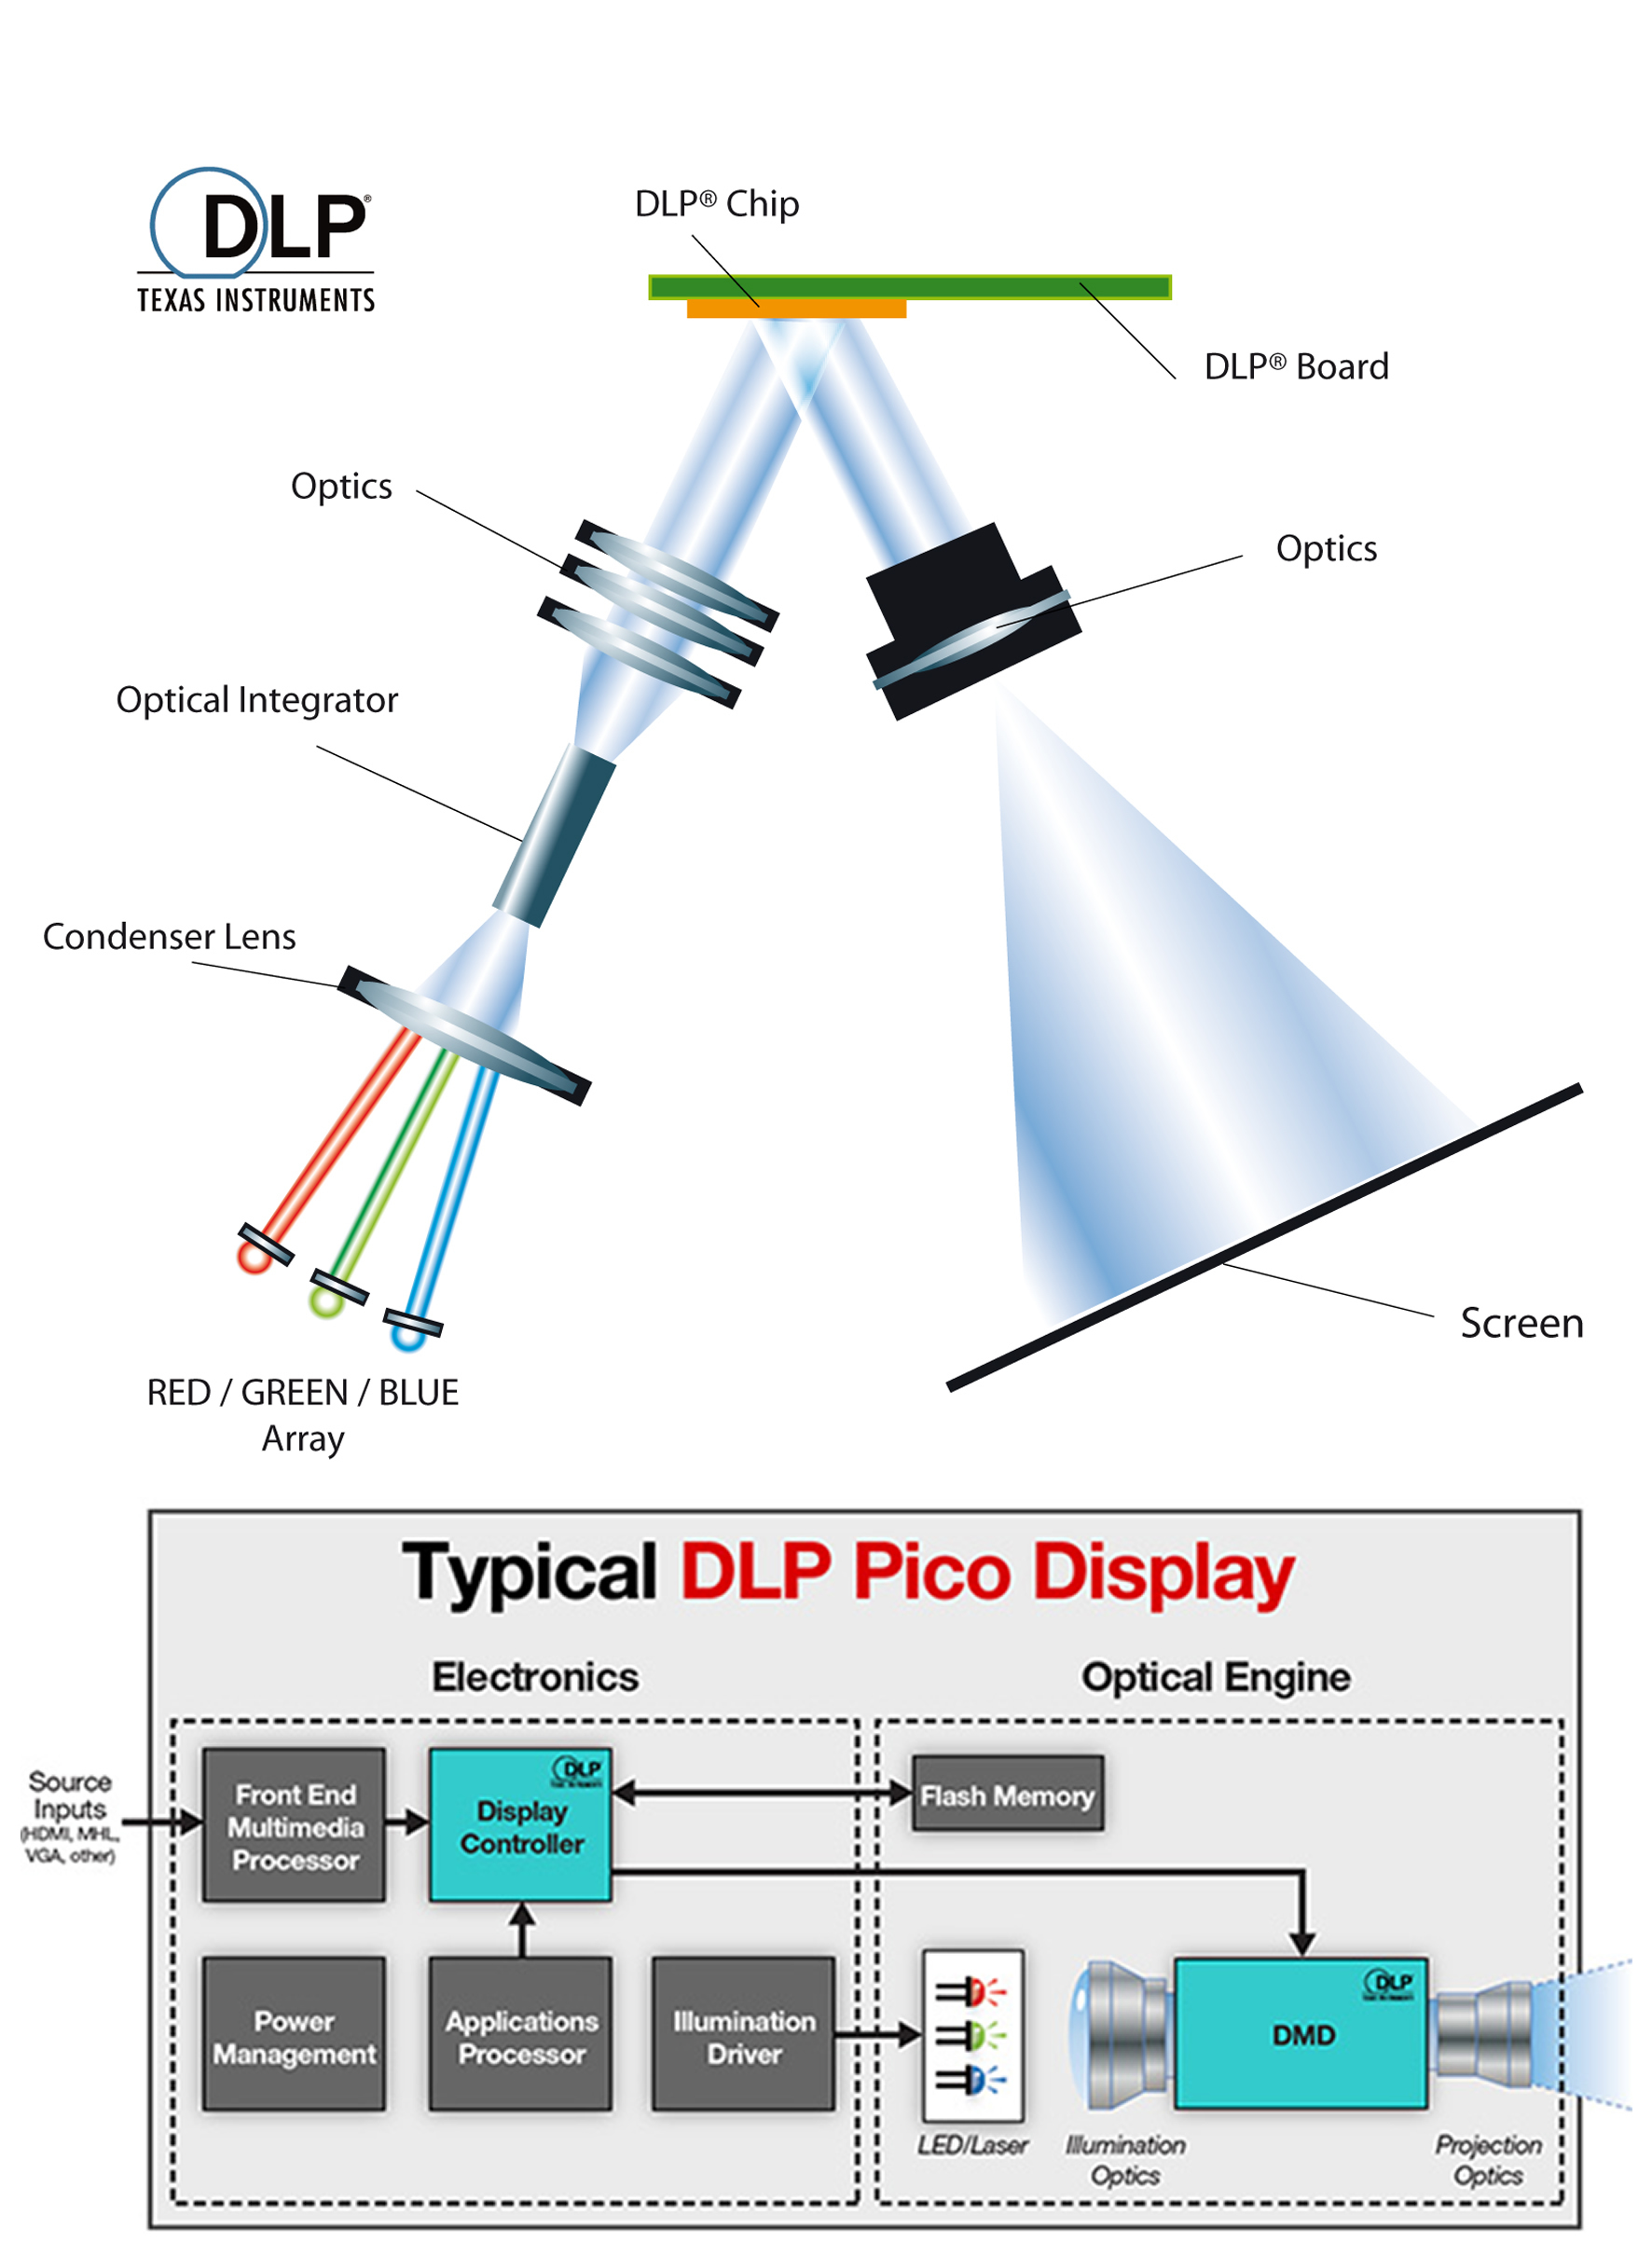 A typical pico display system